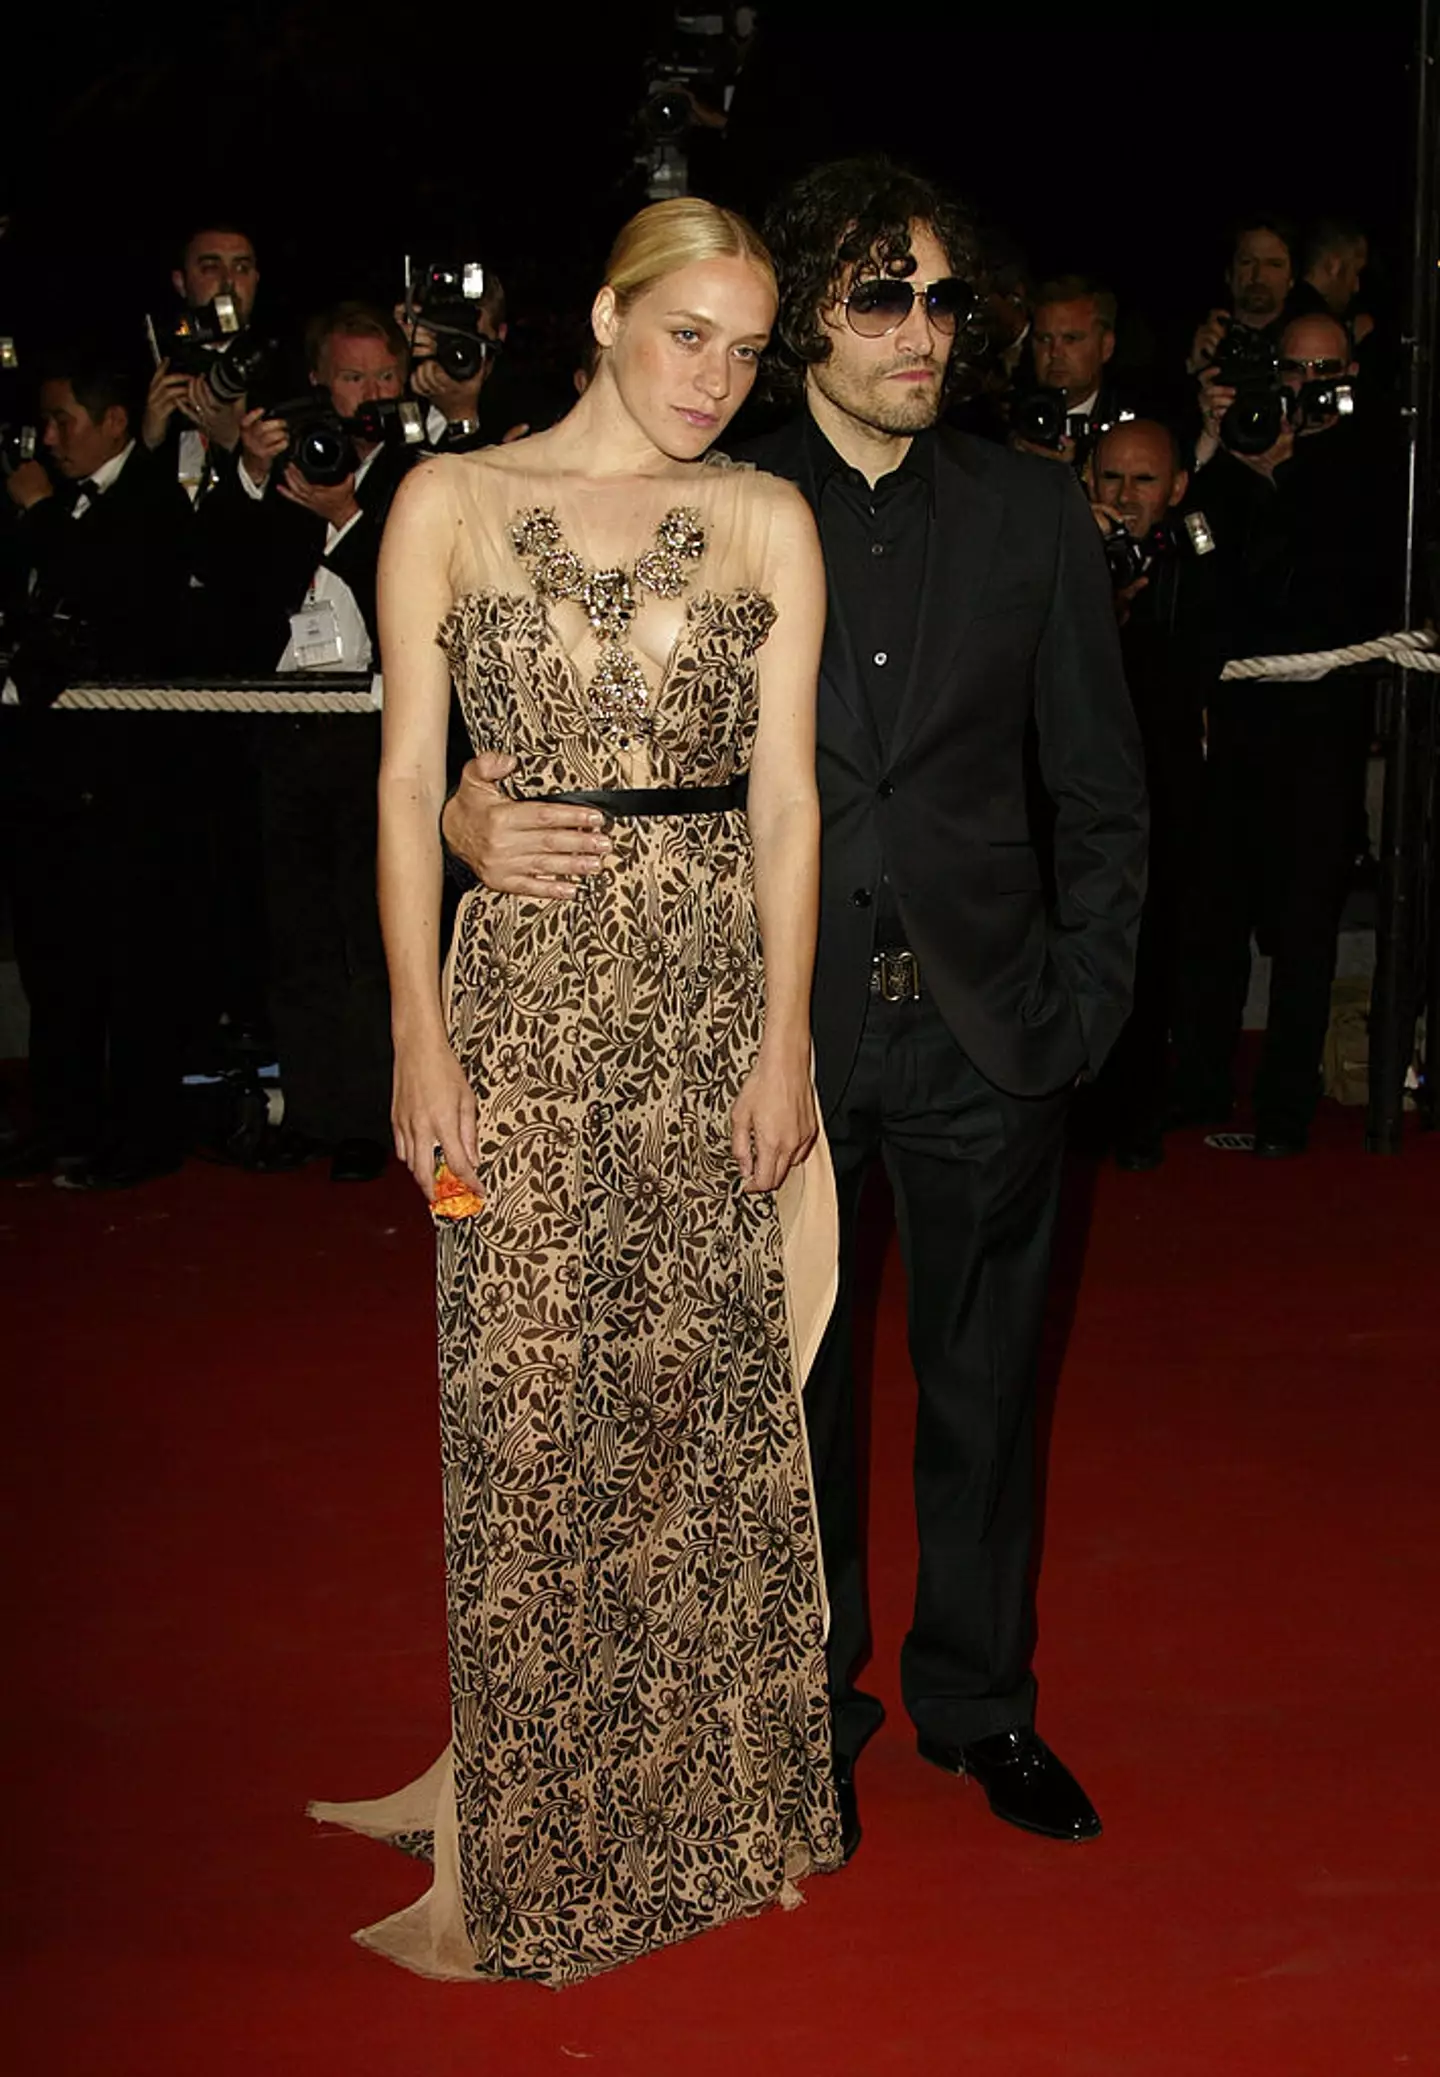 Chloe Sevigny and Vincent Gallo at the Cannes Film Festival.